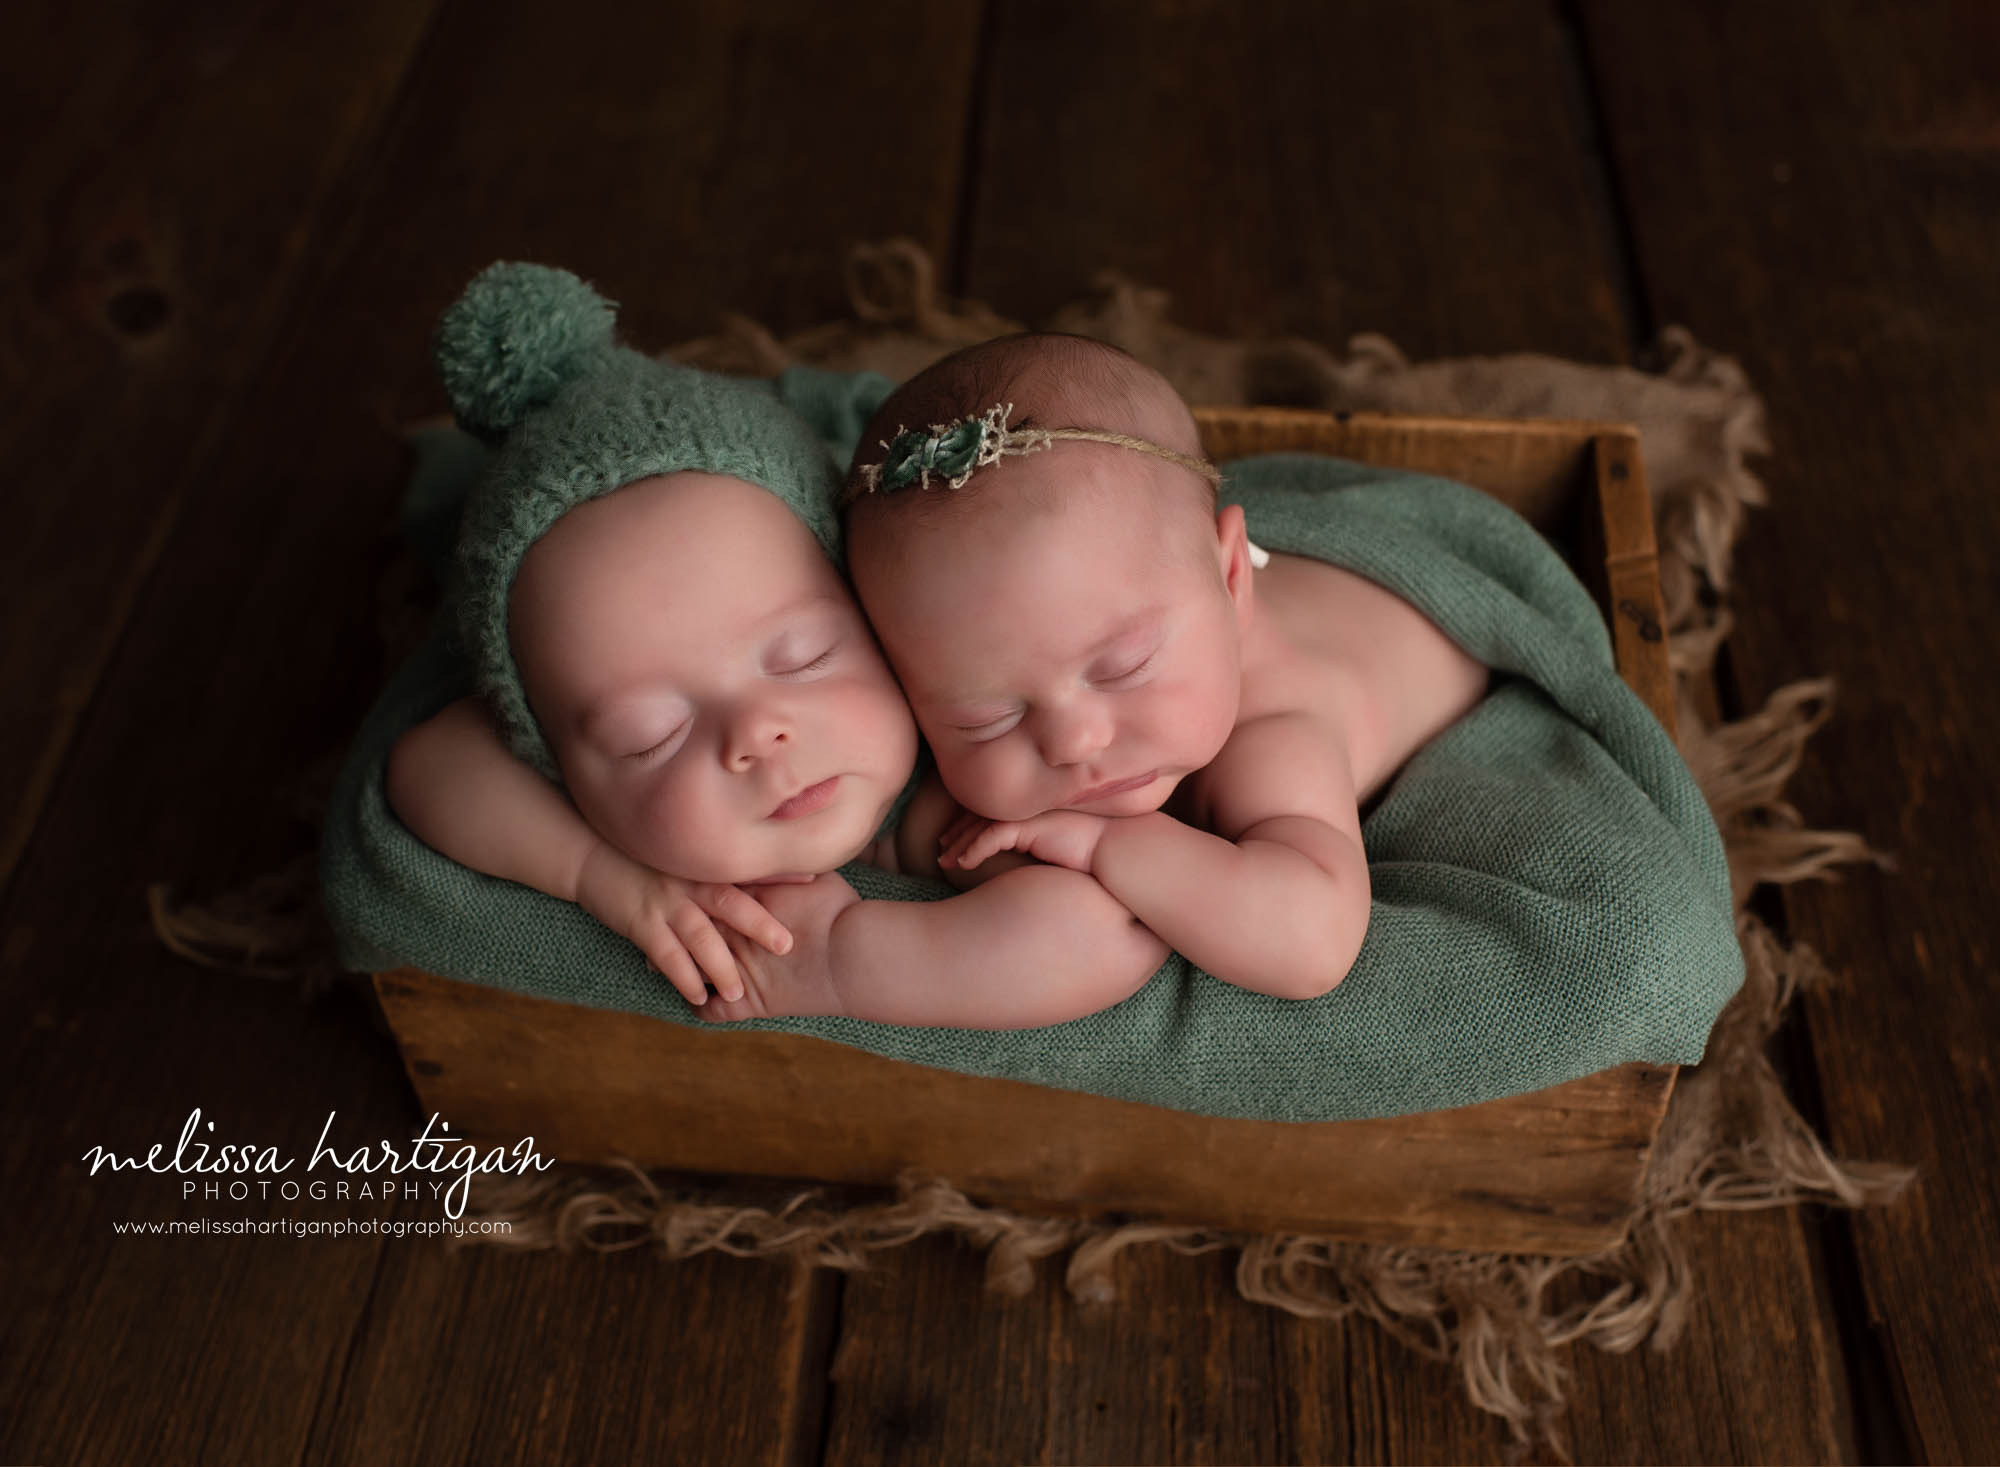 boy girl twin babies posed together in wooden crate with green layer wrap pom sleepy cap and floral tie back newborn photography connecticut